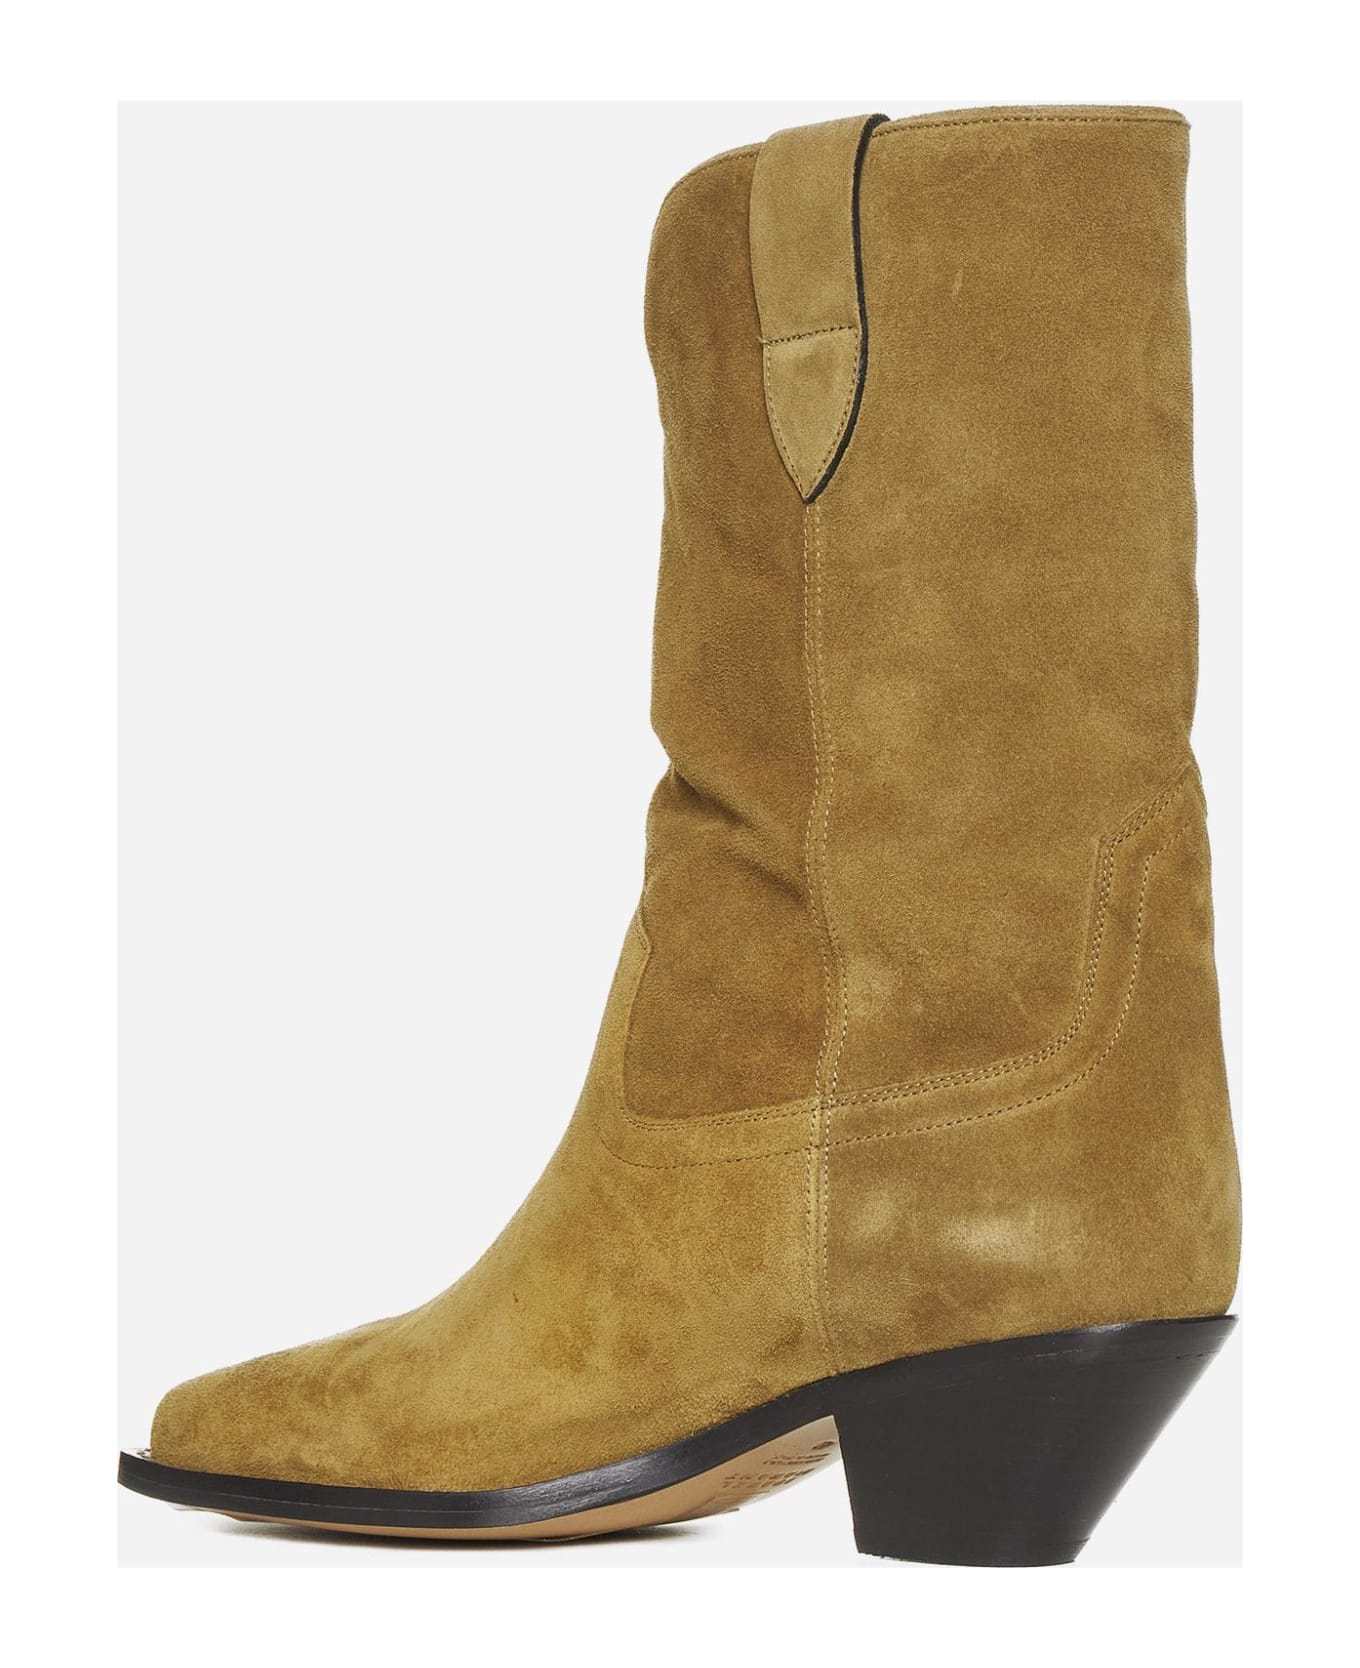 Isabel Marant Dahope Suede Ankle Boots - BROWNISH-GREY 